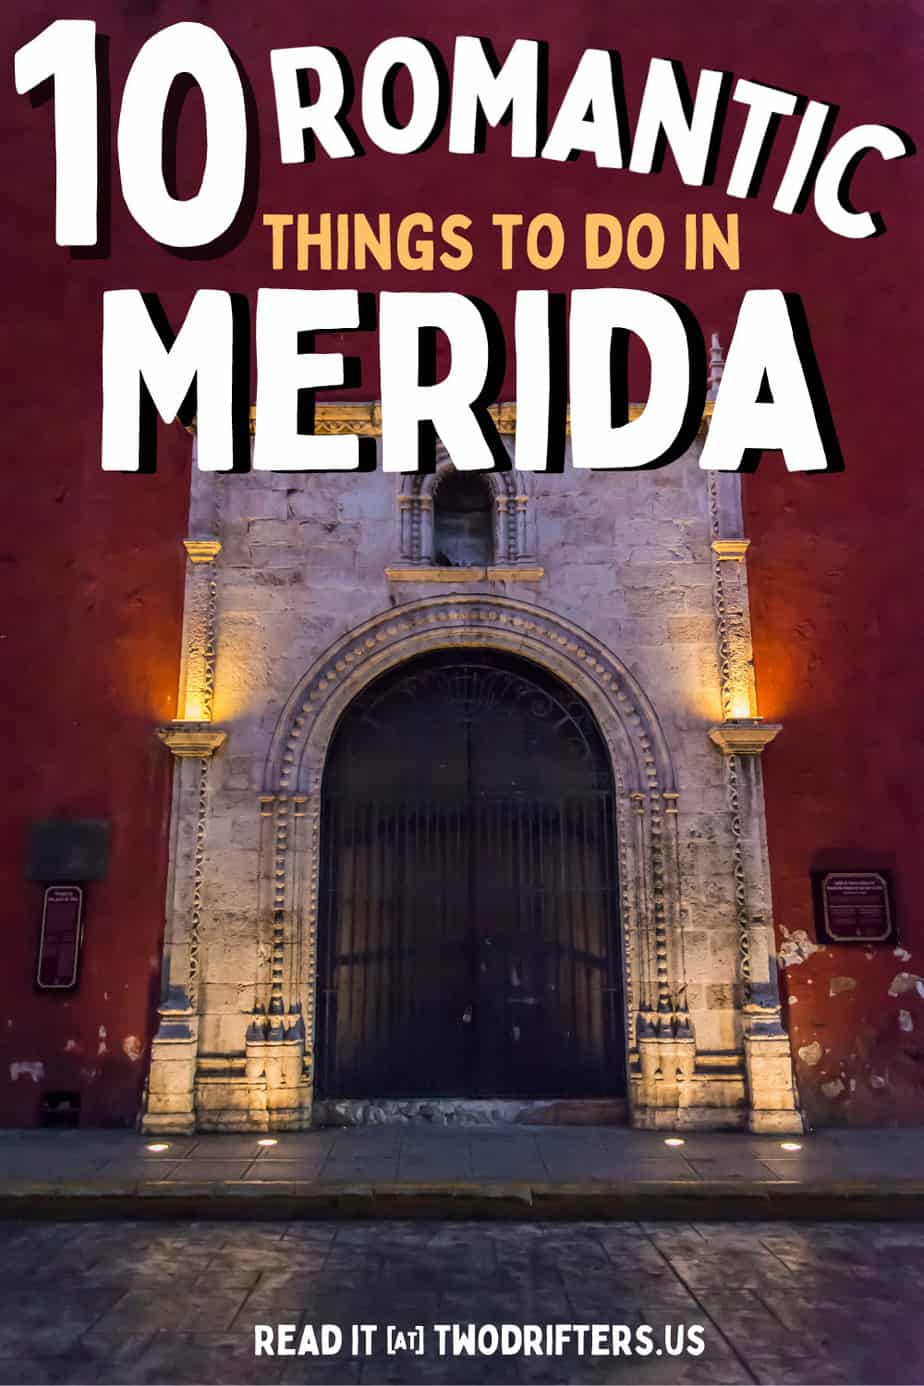 Pinterest social image that says “10 romantic things to do in Merida.”